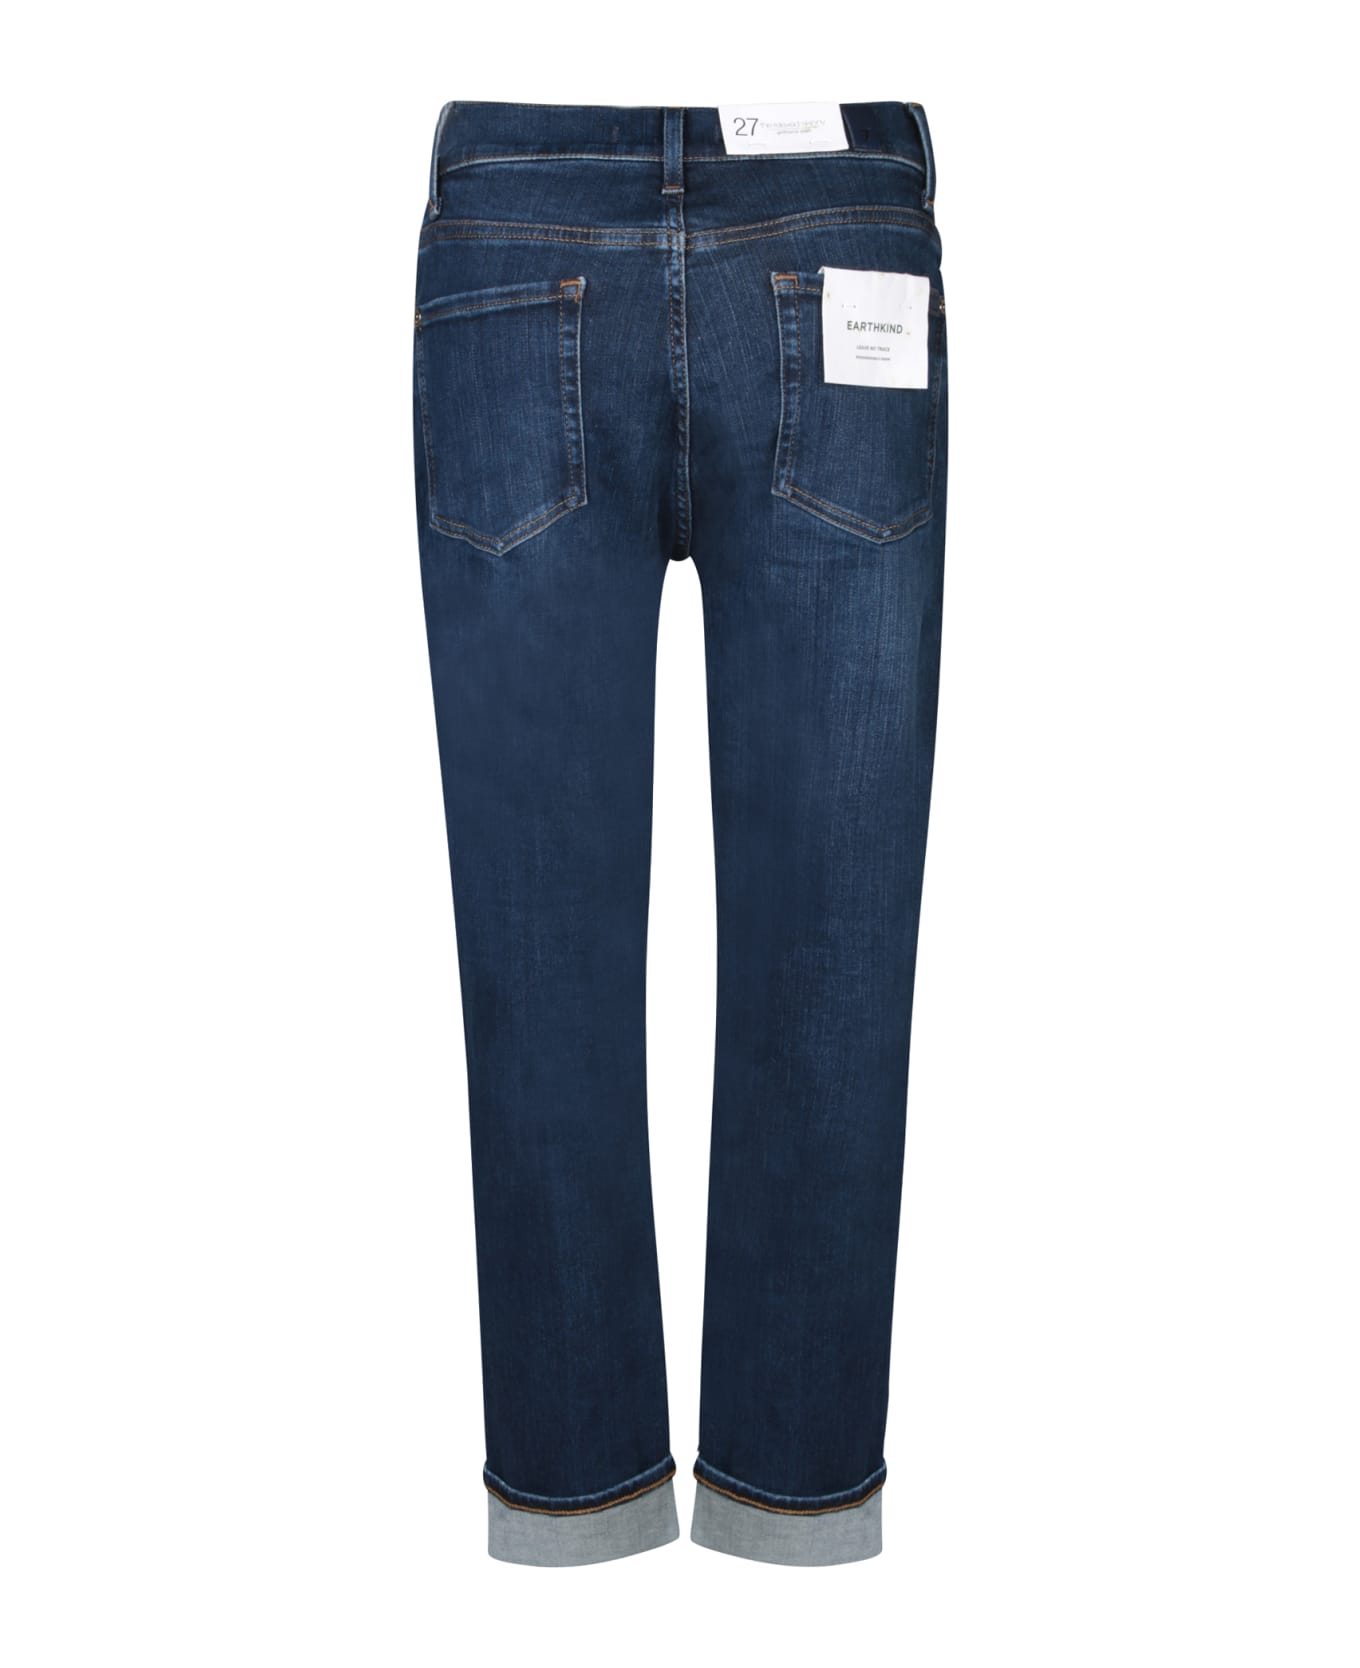 7 For All Mankind Relaxed Skinny Blue Jeans - Blue